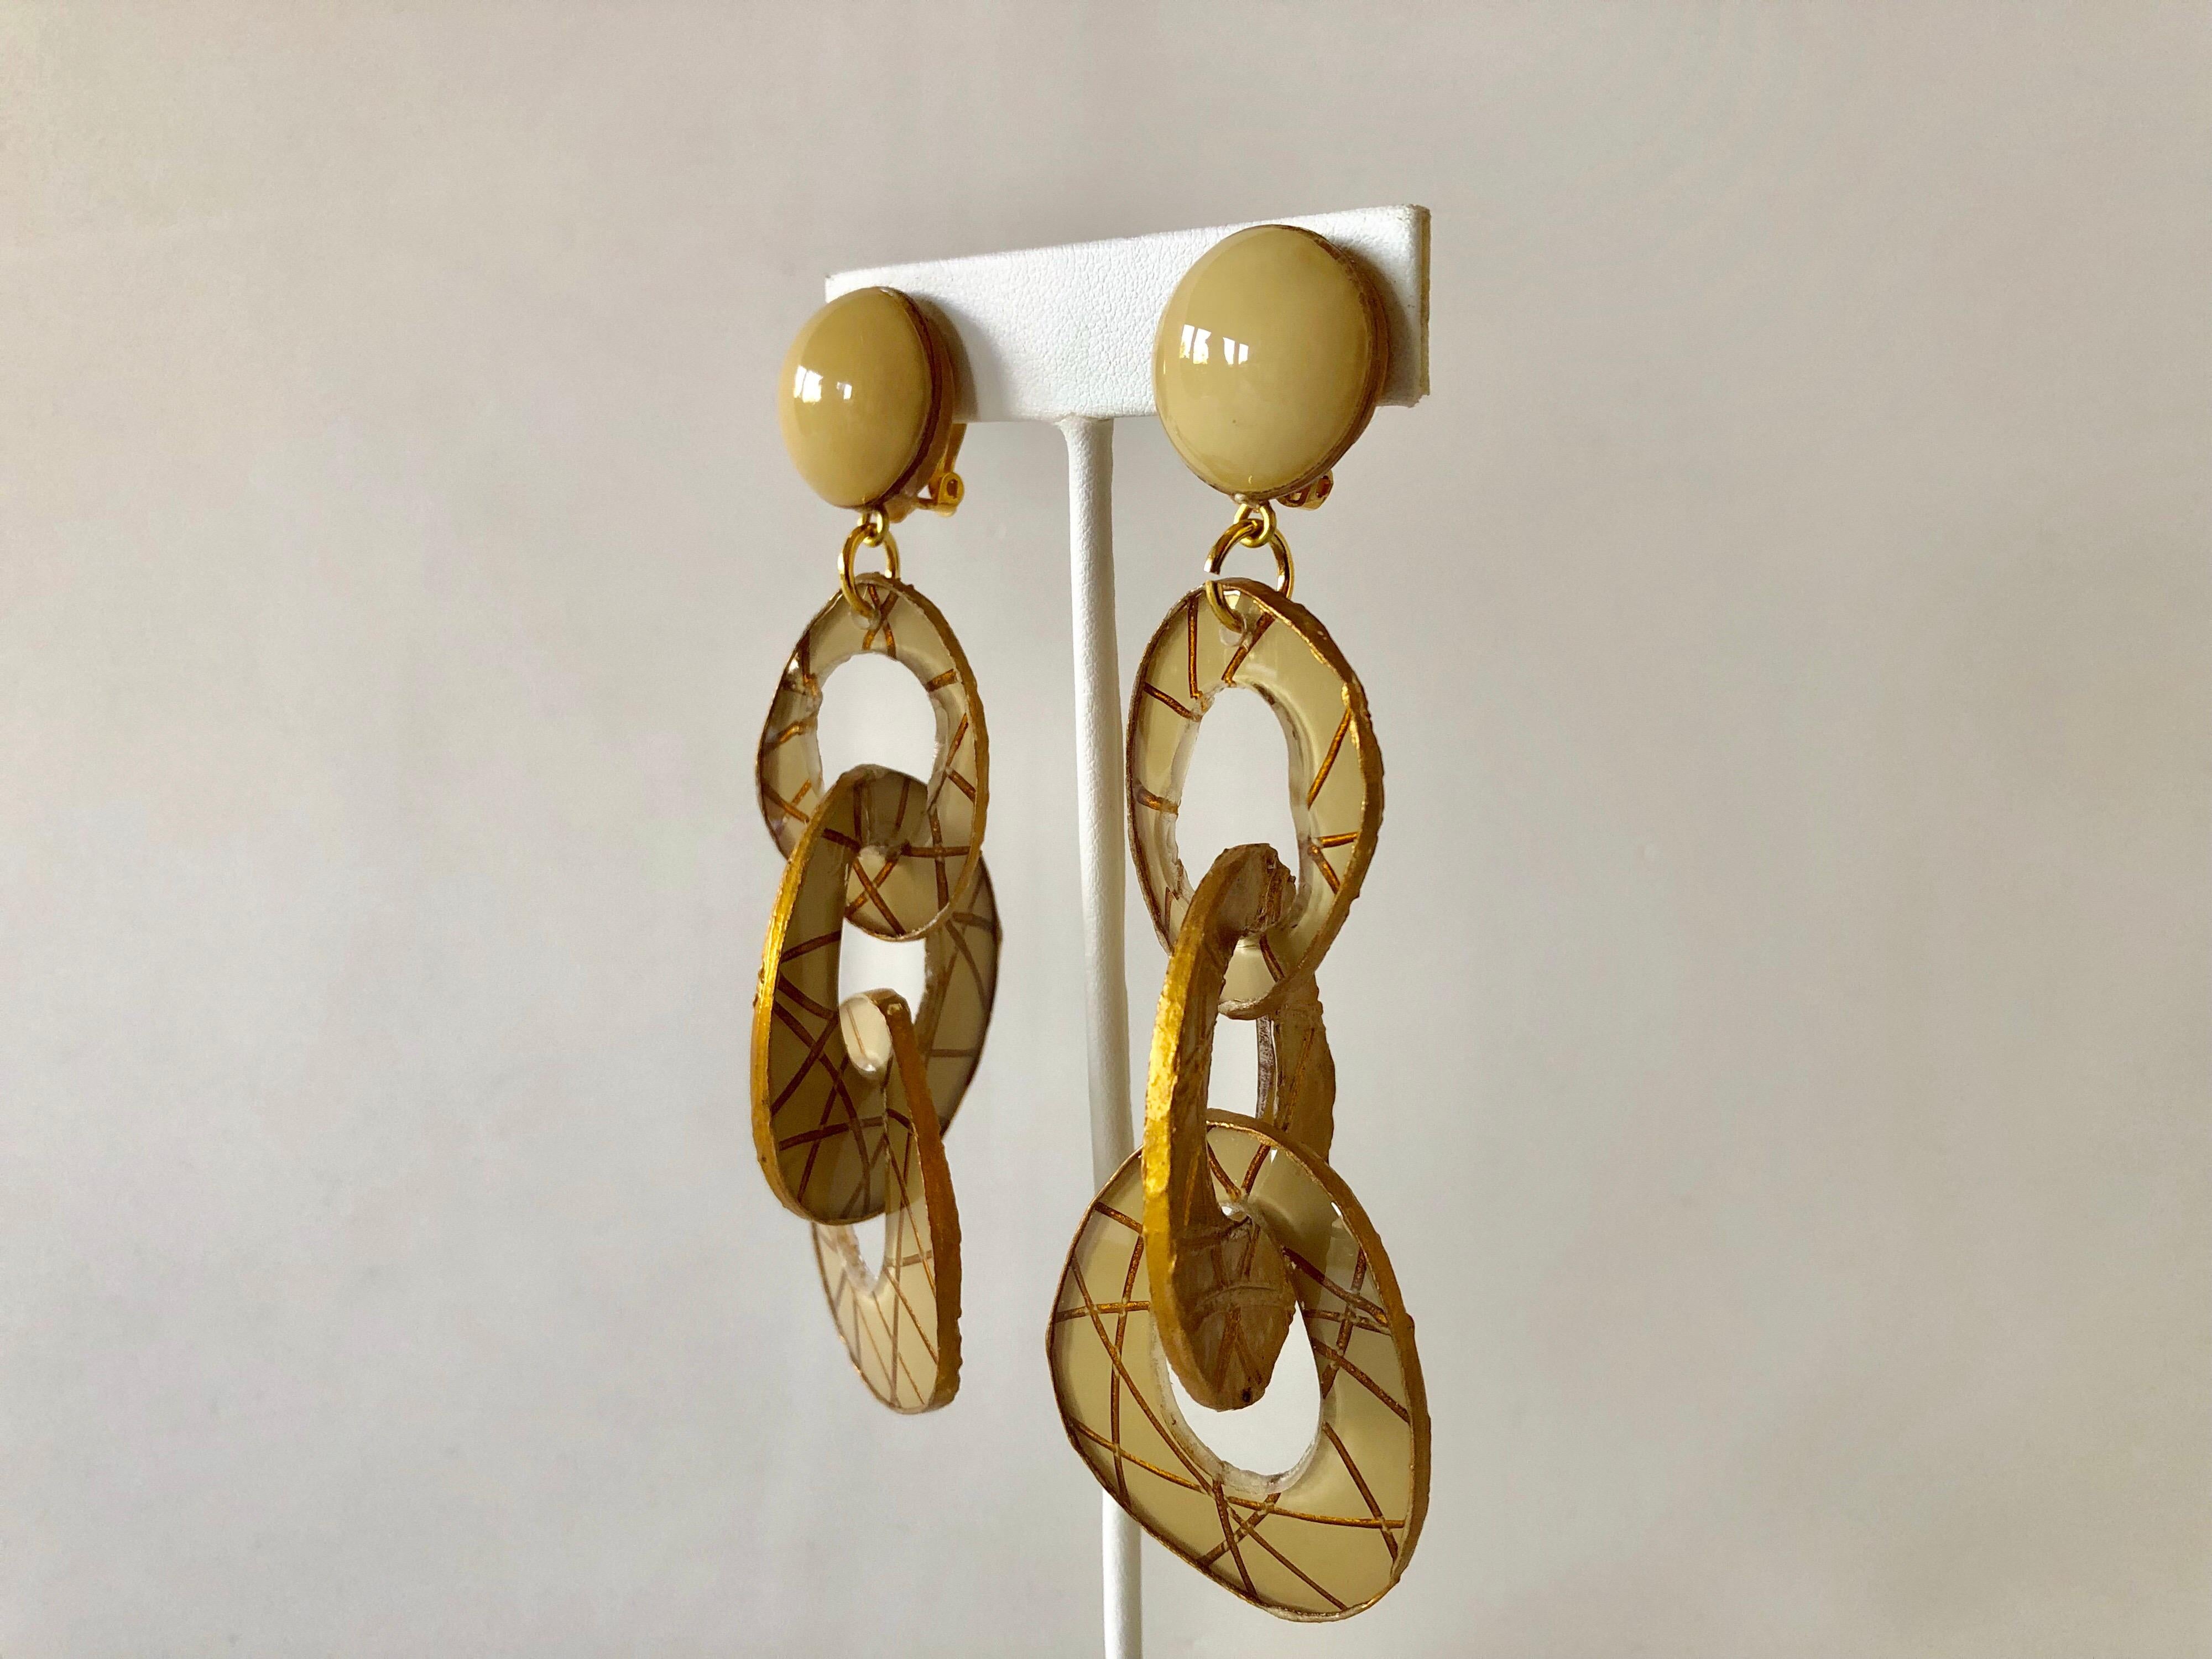 Chic and  very current, these handmade fashion forward artisanal clip-on earrings were made in Paris. The statement earrings feature three carved detailed architectural  (enamel and resin composite) geometric links in taupe and gold. Lightweight and